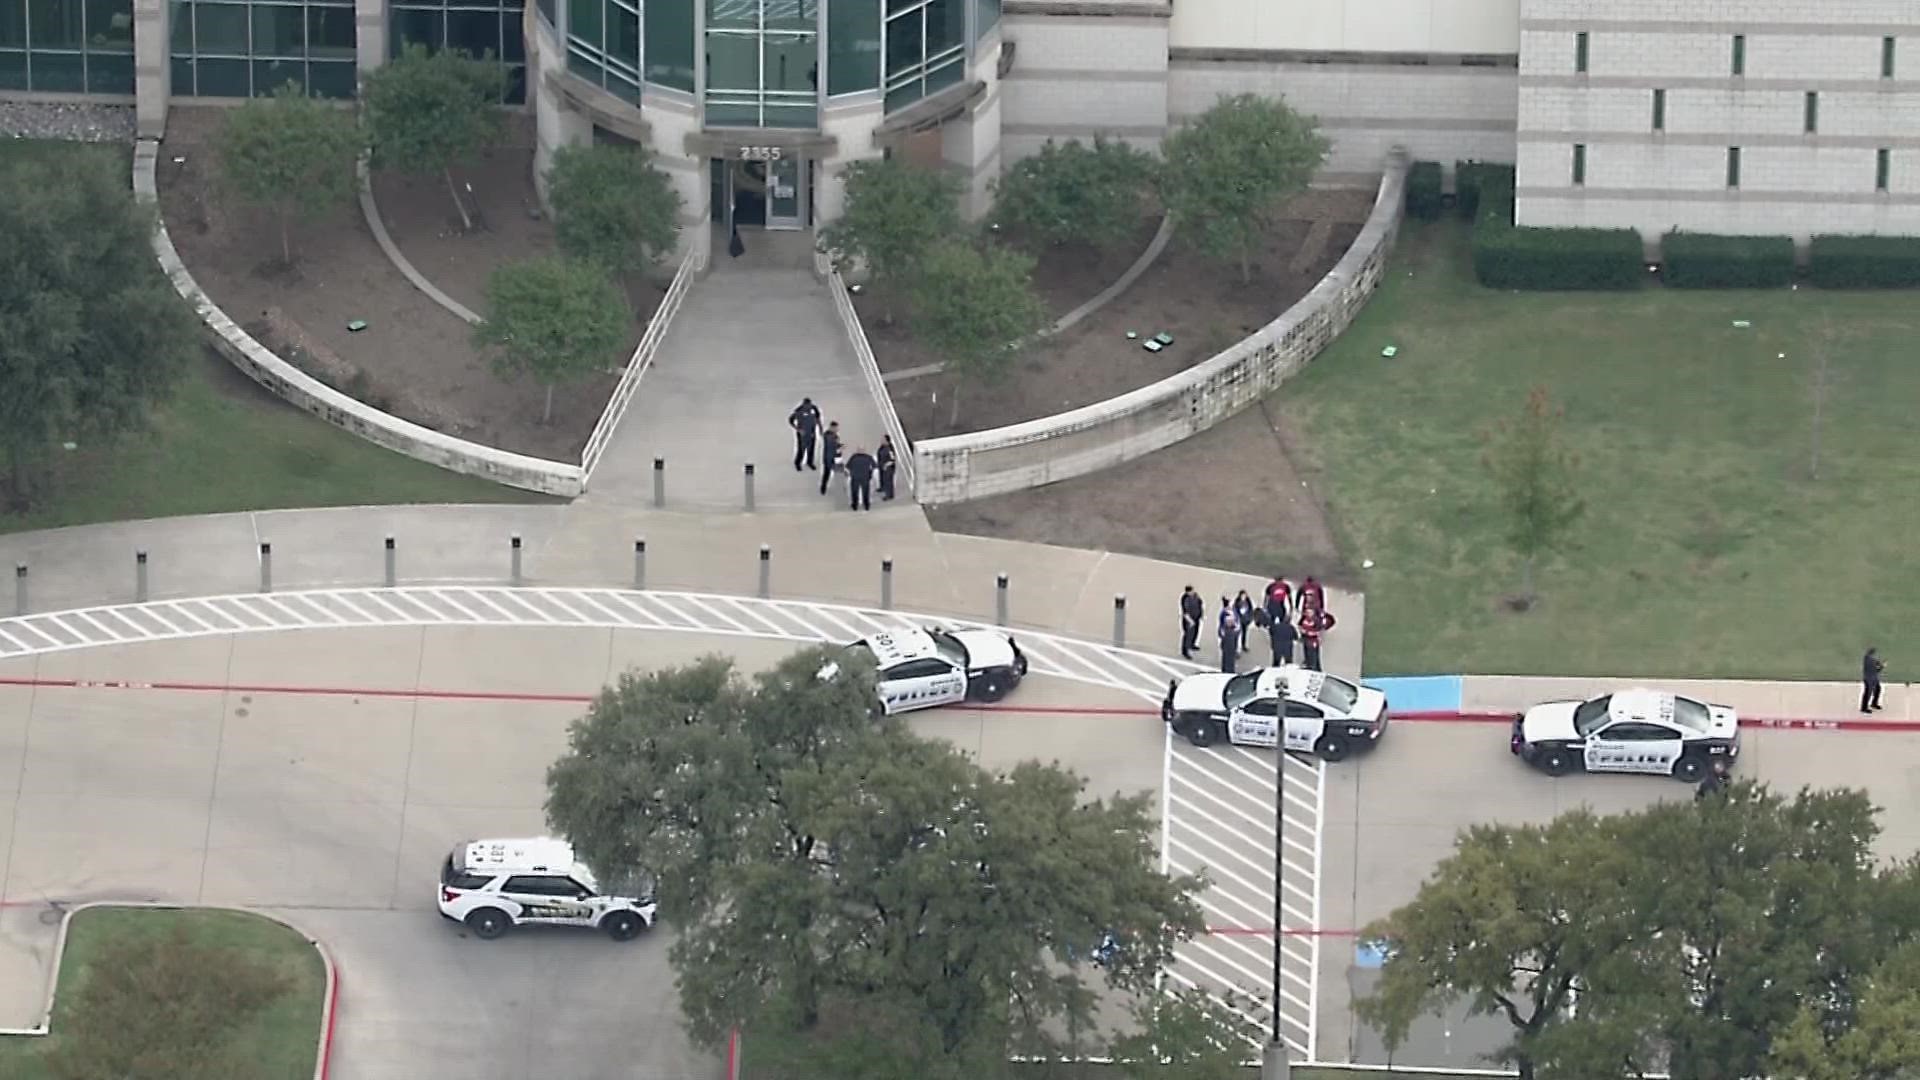 Dallas police were responding to reports of shots fired at the Dallas County Medical Examiner's Office on Tuesday. More information was not immediately available.